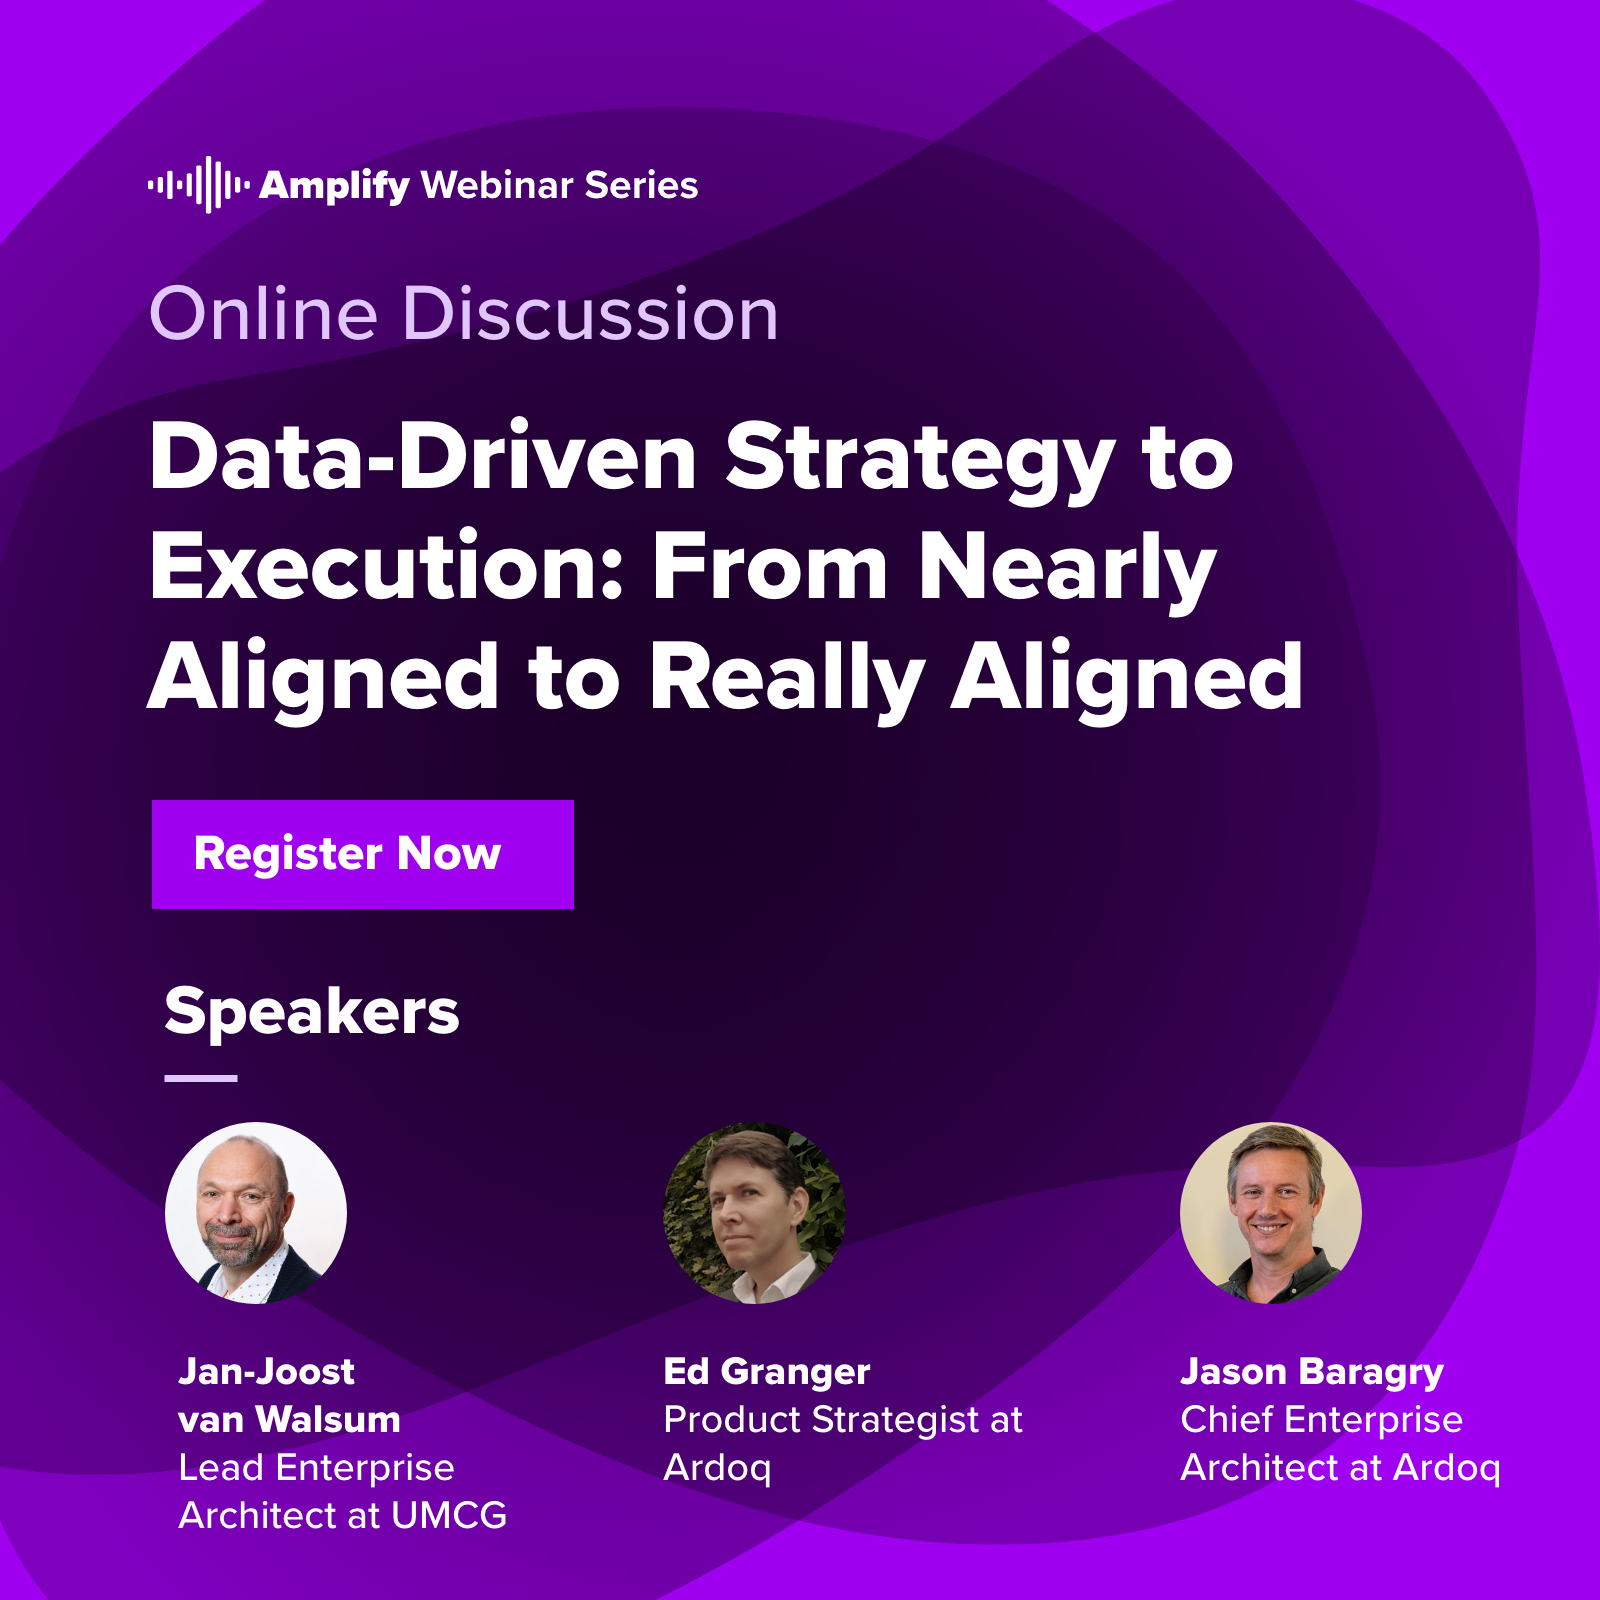 Data-Driven Strategy to Execution: From Nearly Aligned to Really Aligned